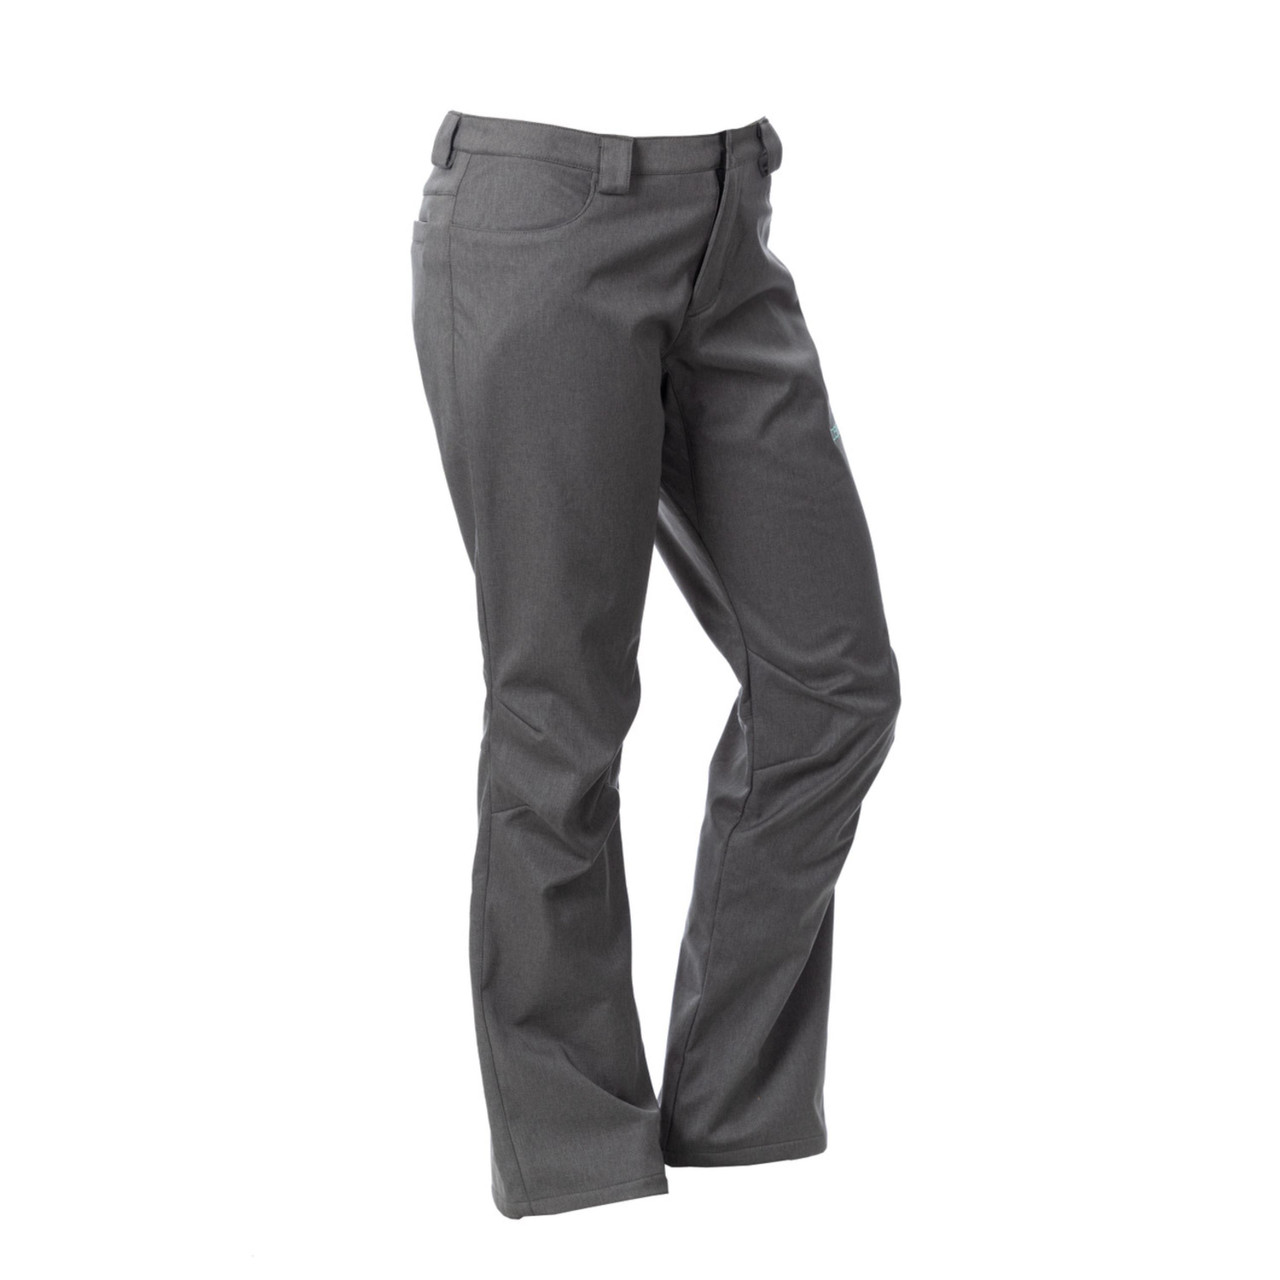 Cold Weather Tech Pant - Black or Grey